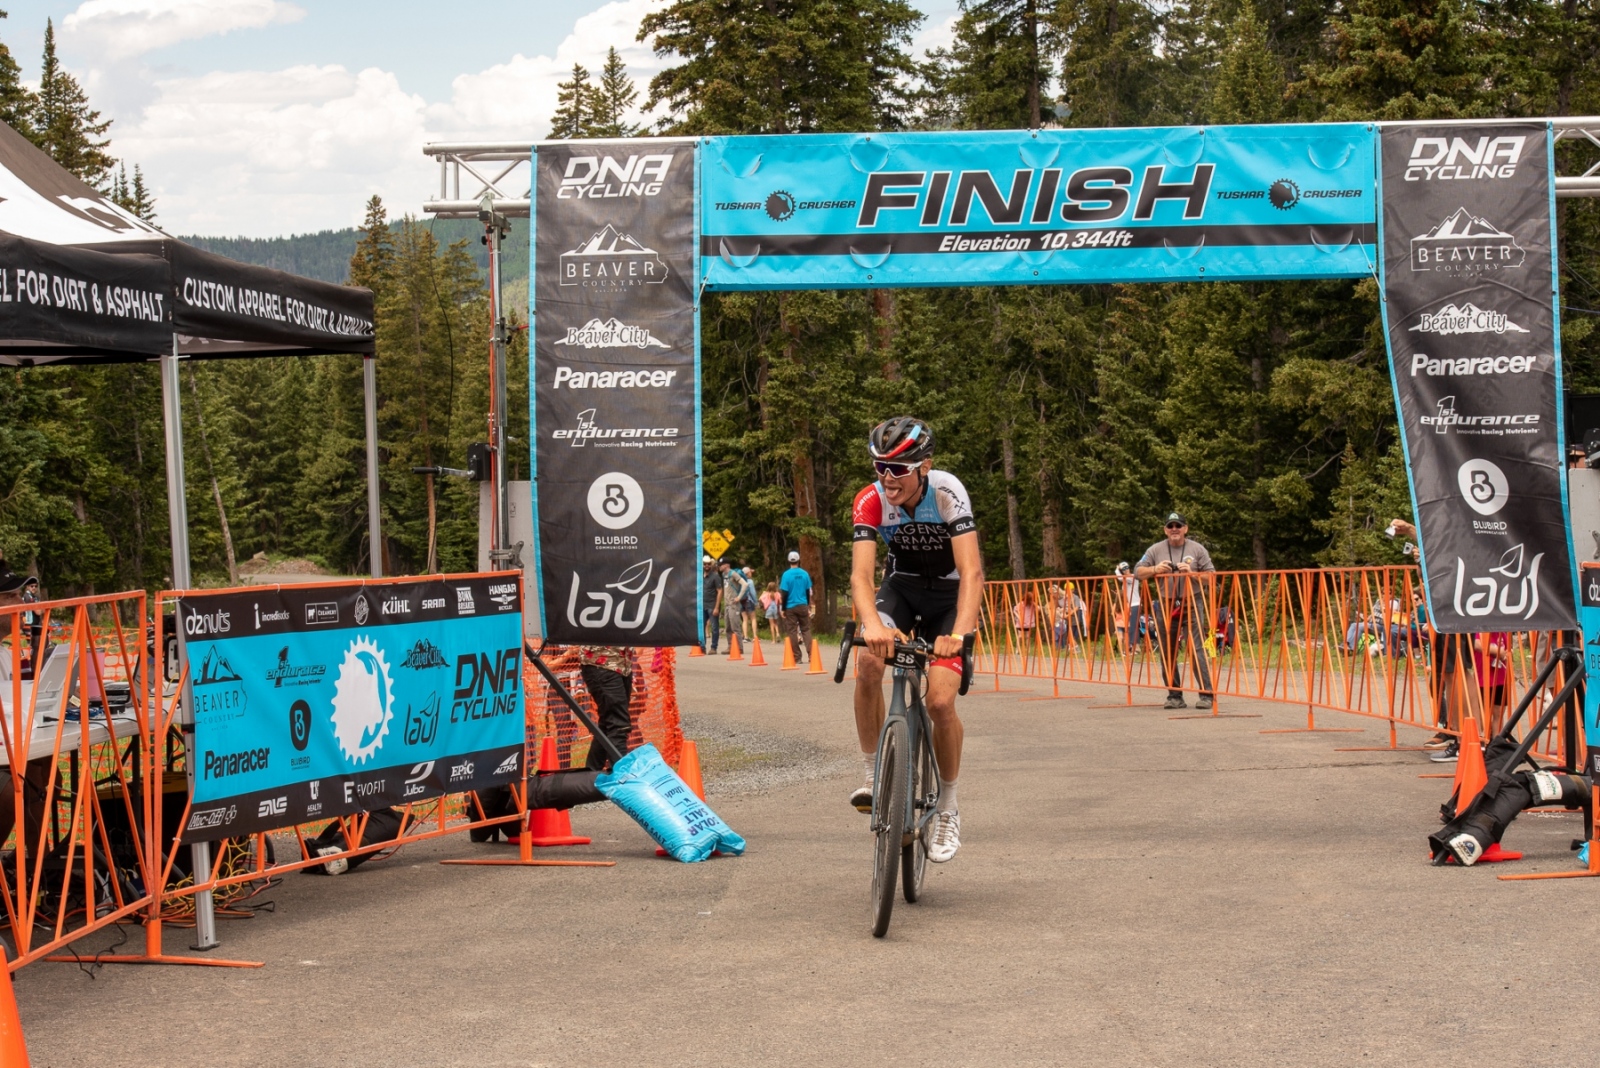 Something about the Crusher causes people's tongues to hang out. Eddie Anderson (Axeon-Hagens Berman) crosses the line in second place. Photo: Steven L. Sheffield.